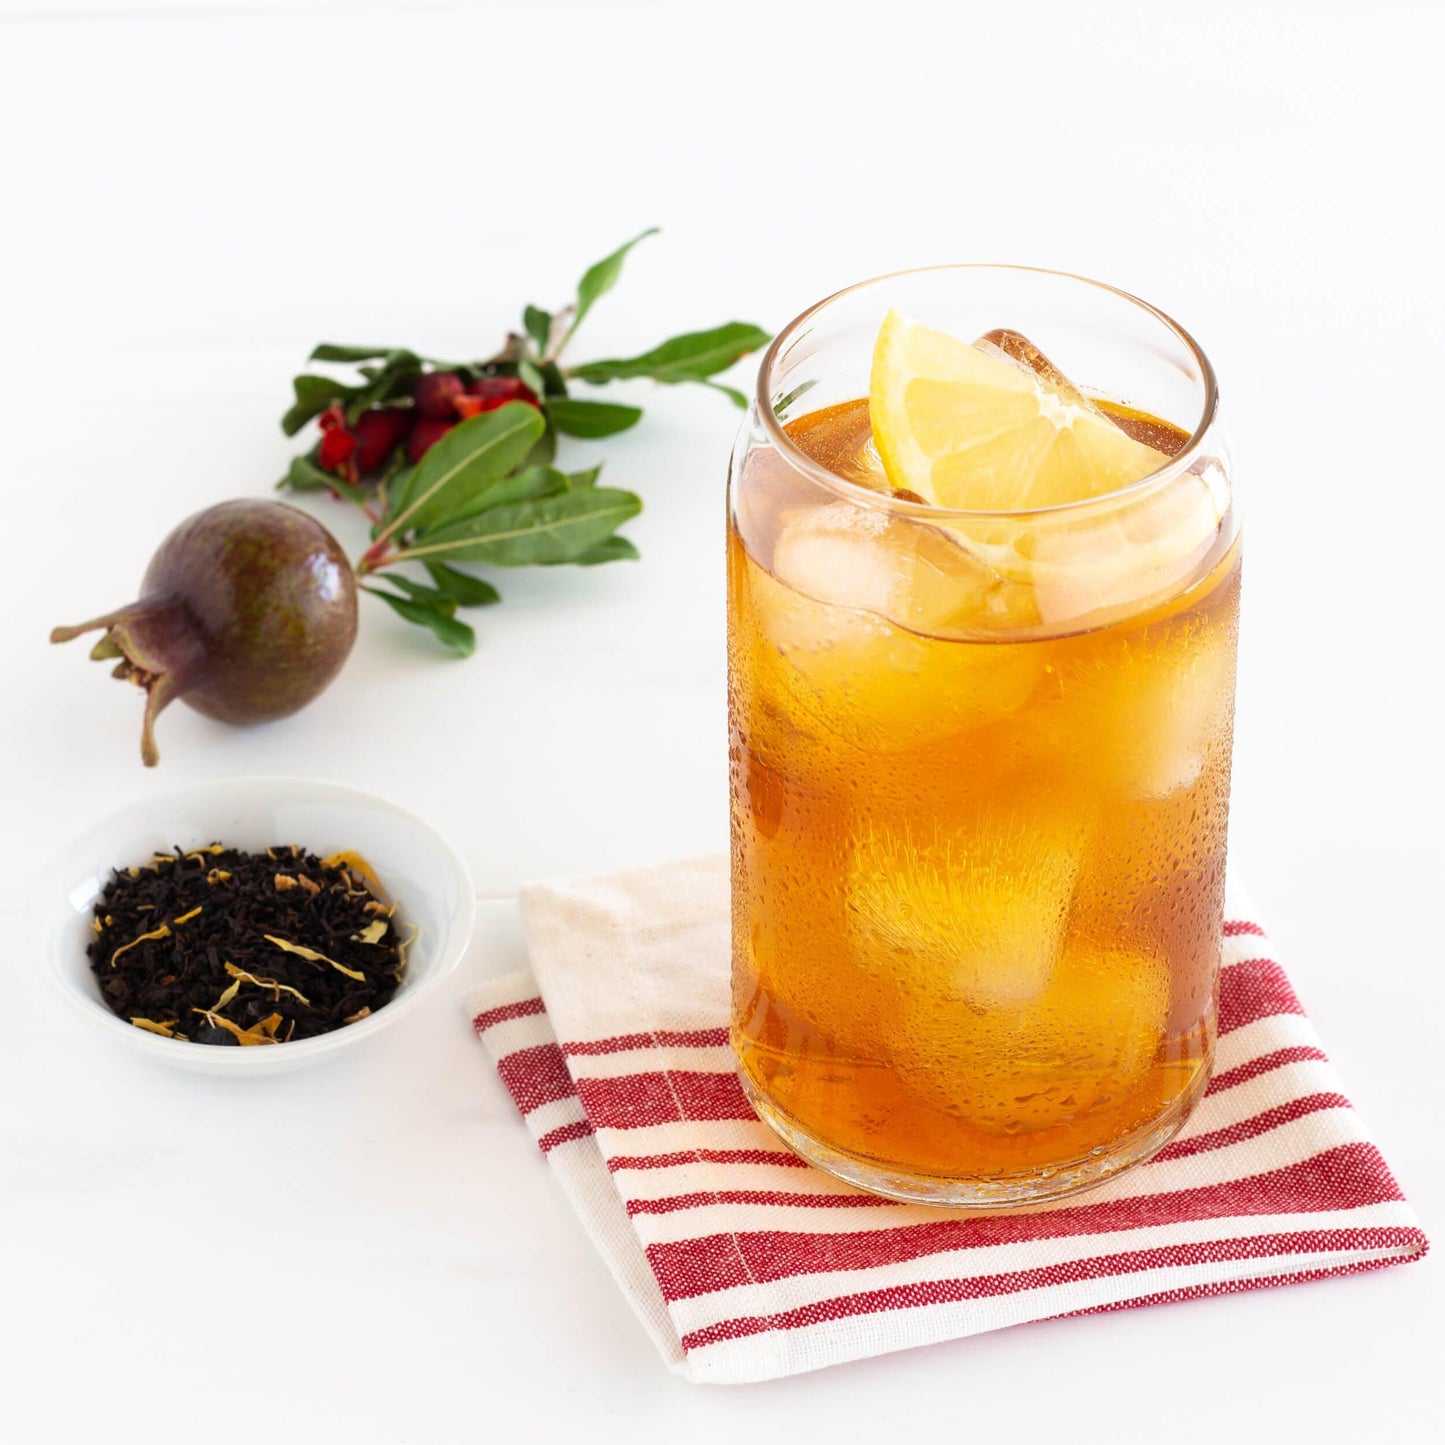 Pomegranate Lemon Organic Black Tea shown as iced tea in a glass displayed on a red and white striped napkin, with a small pomegranate and a tiny dish of loose tea leaves nearby